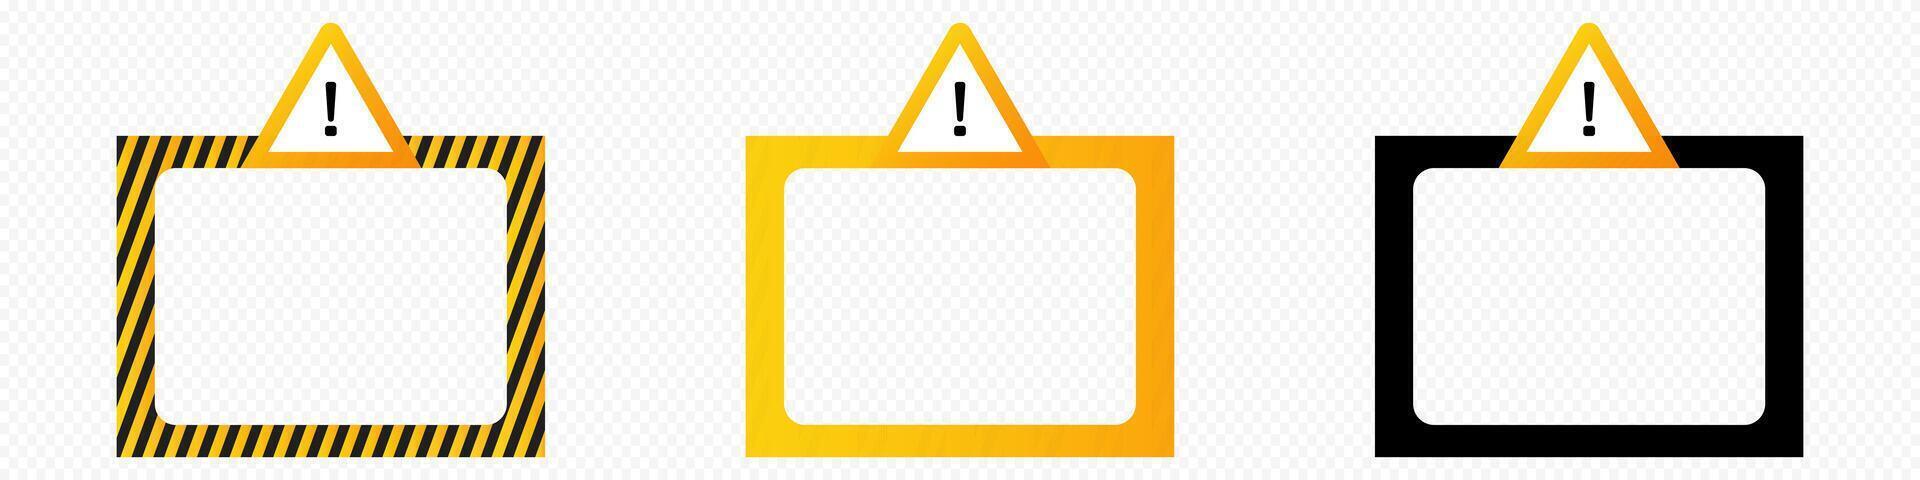 Caution alert frame with warning exclamation triangle vector